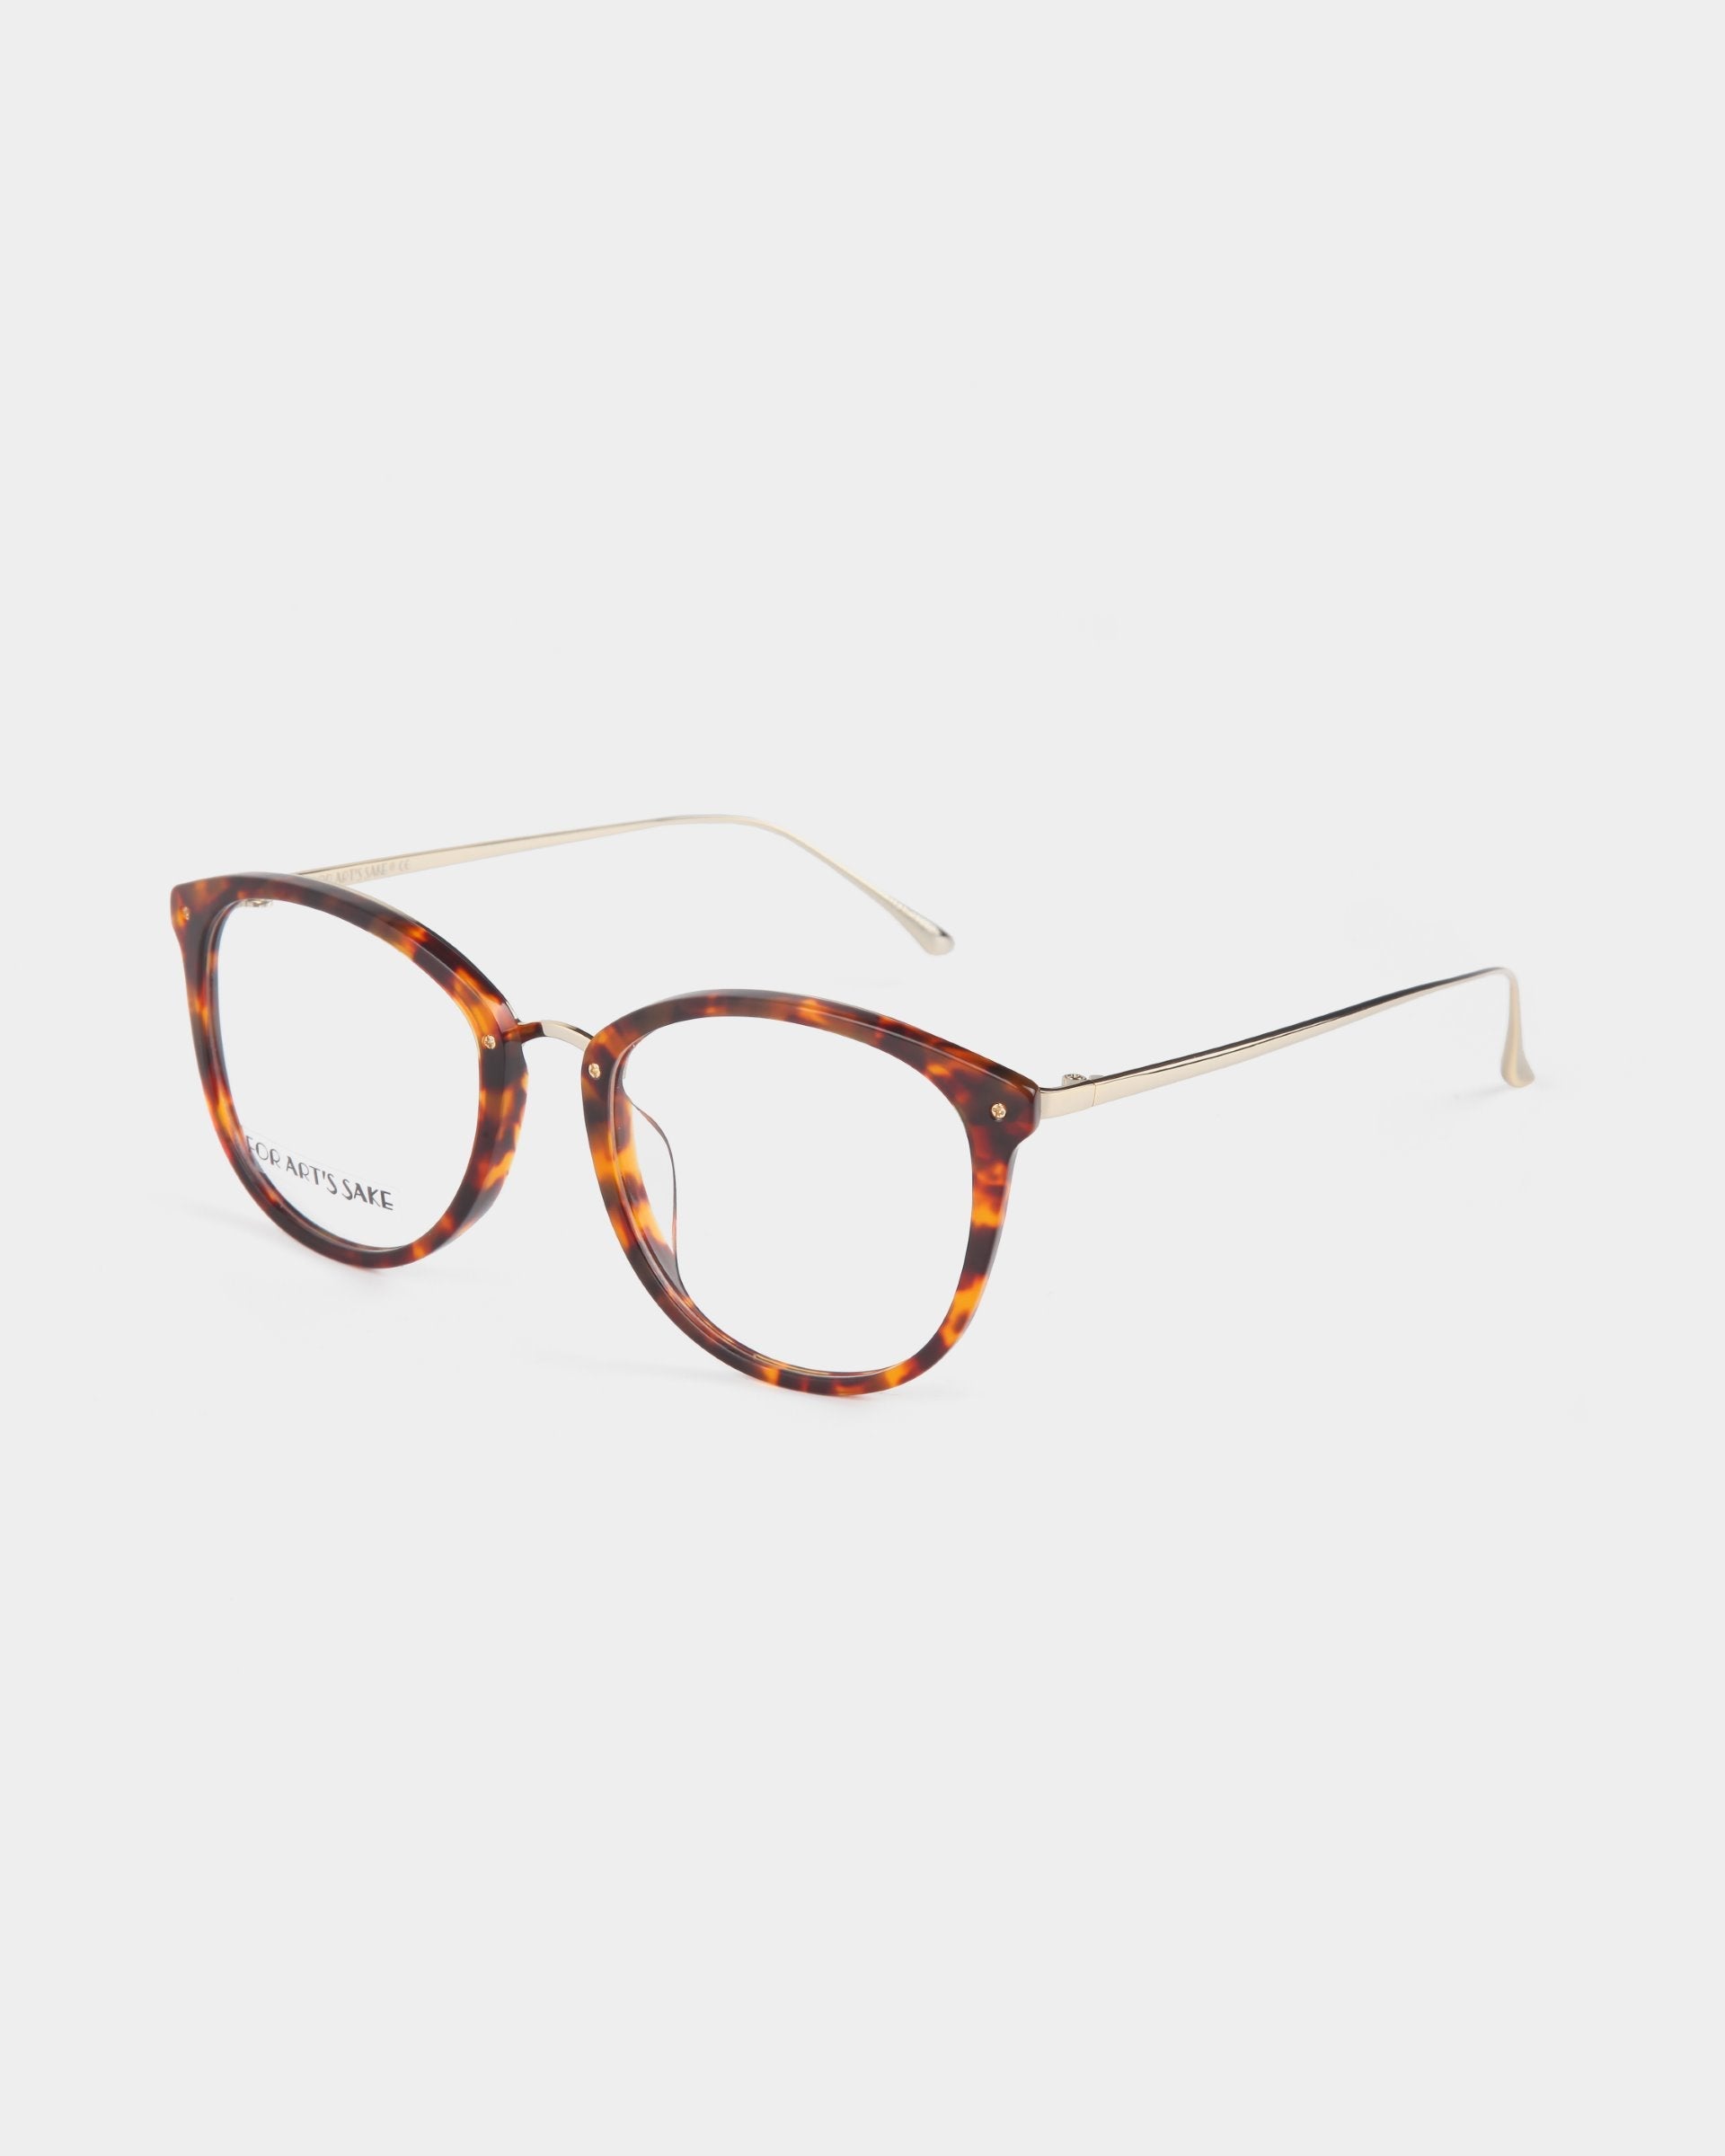 A pair of Club Brown glasses by For Art's Sake® with a tortoiseshell-pattern and a rounded cat-eye shape. The lenses are clear, featuring an optional blue light filter, and the thin gold temples and nose pads provide a lightweight and elegant design. Offered with a prescription service, these opticals are set against a plain white background.